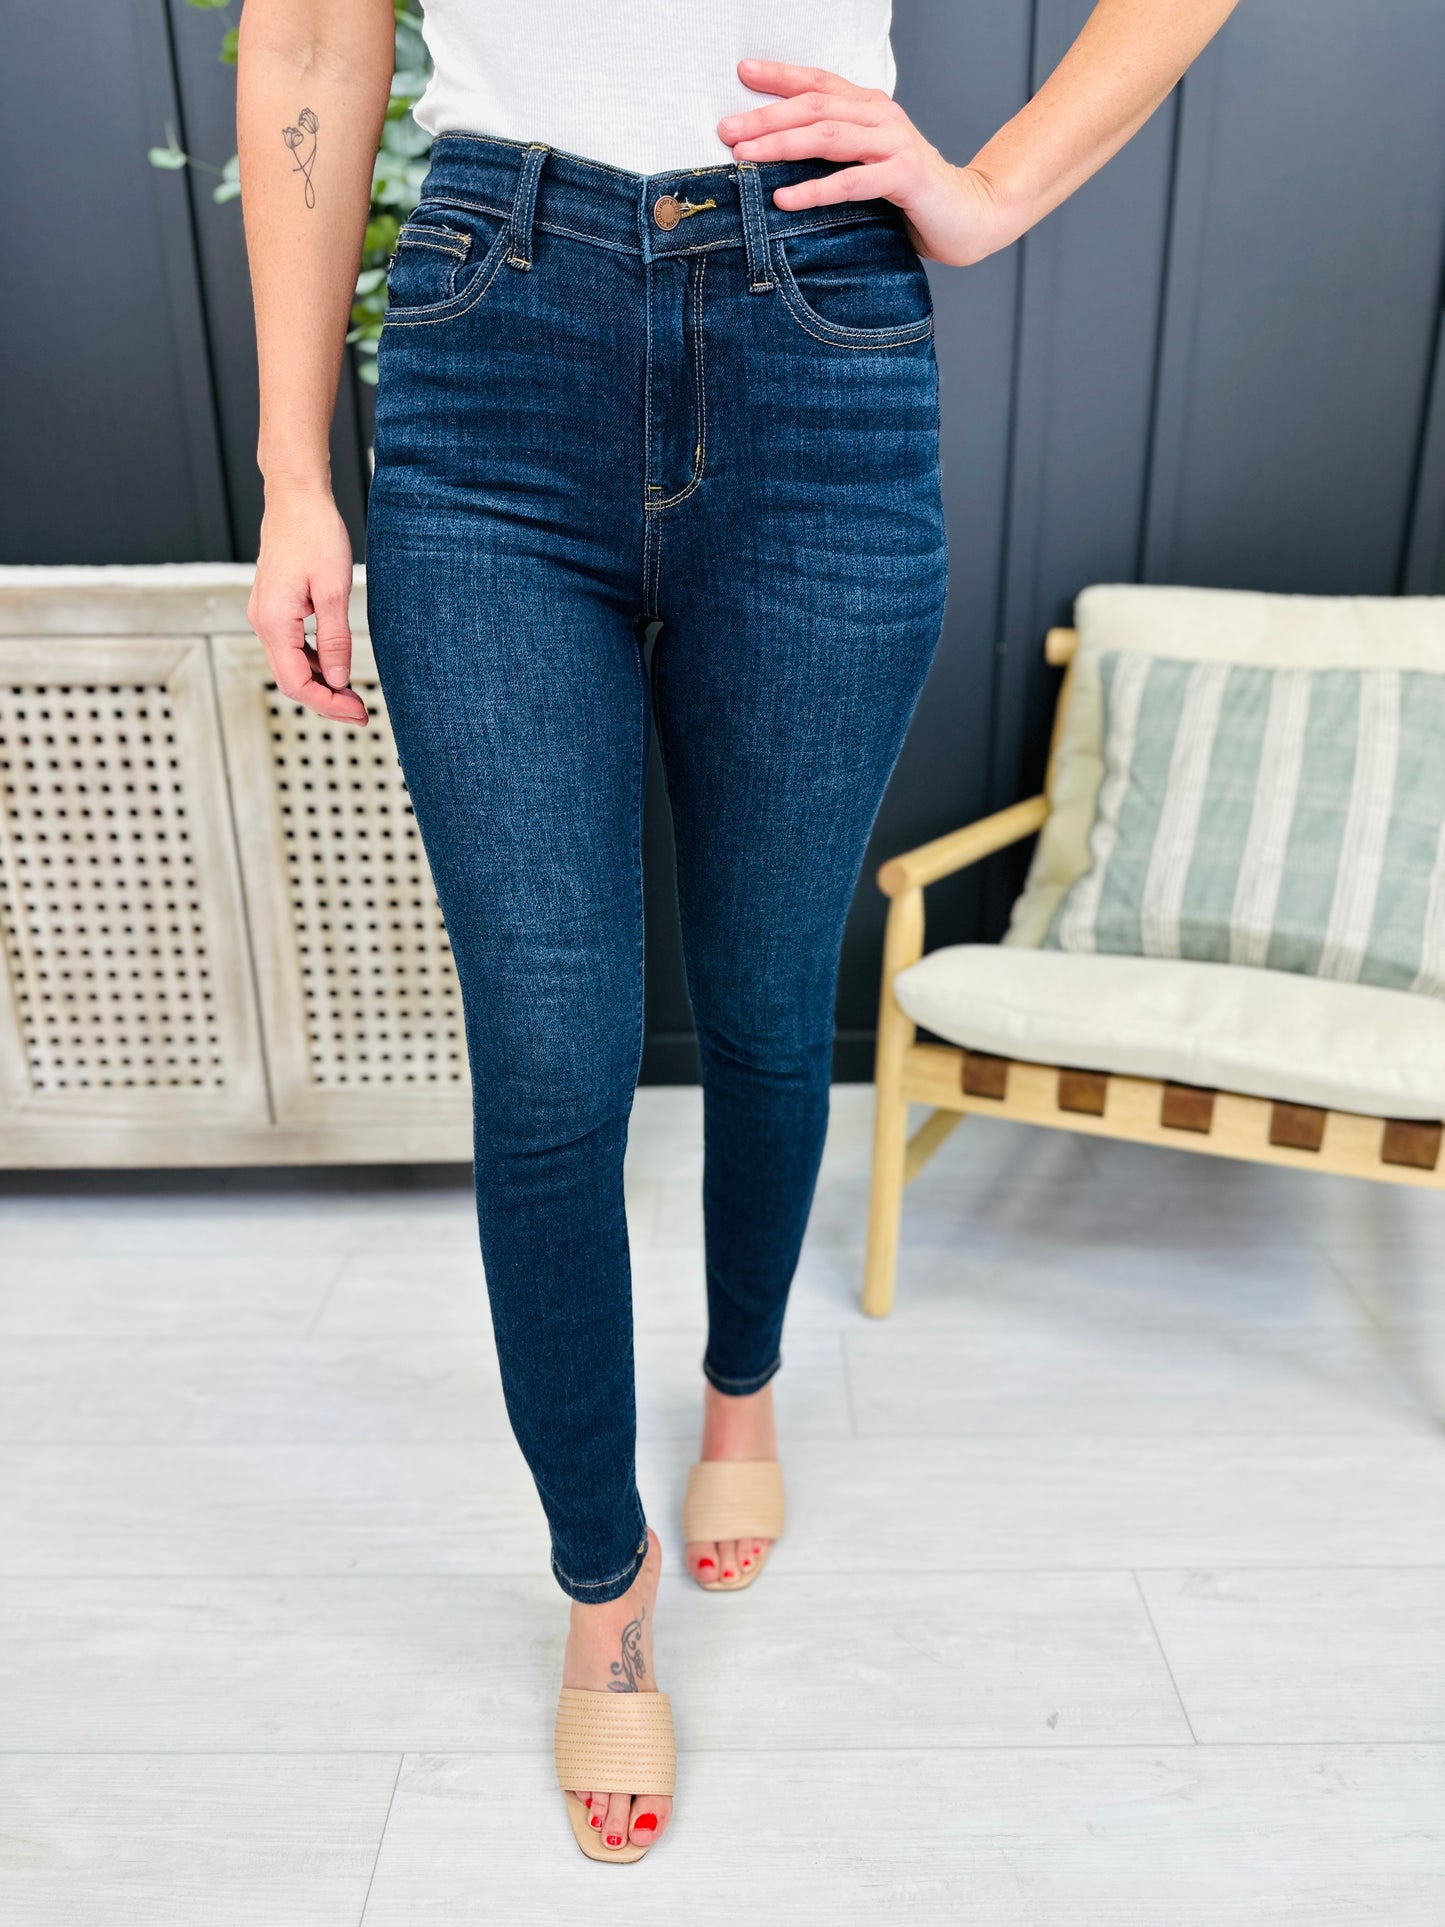 Restock! BEST SELLER! PLUS/REG Judy Blue The Holy Grail of Nondistressed Skinny Jeans